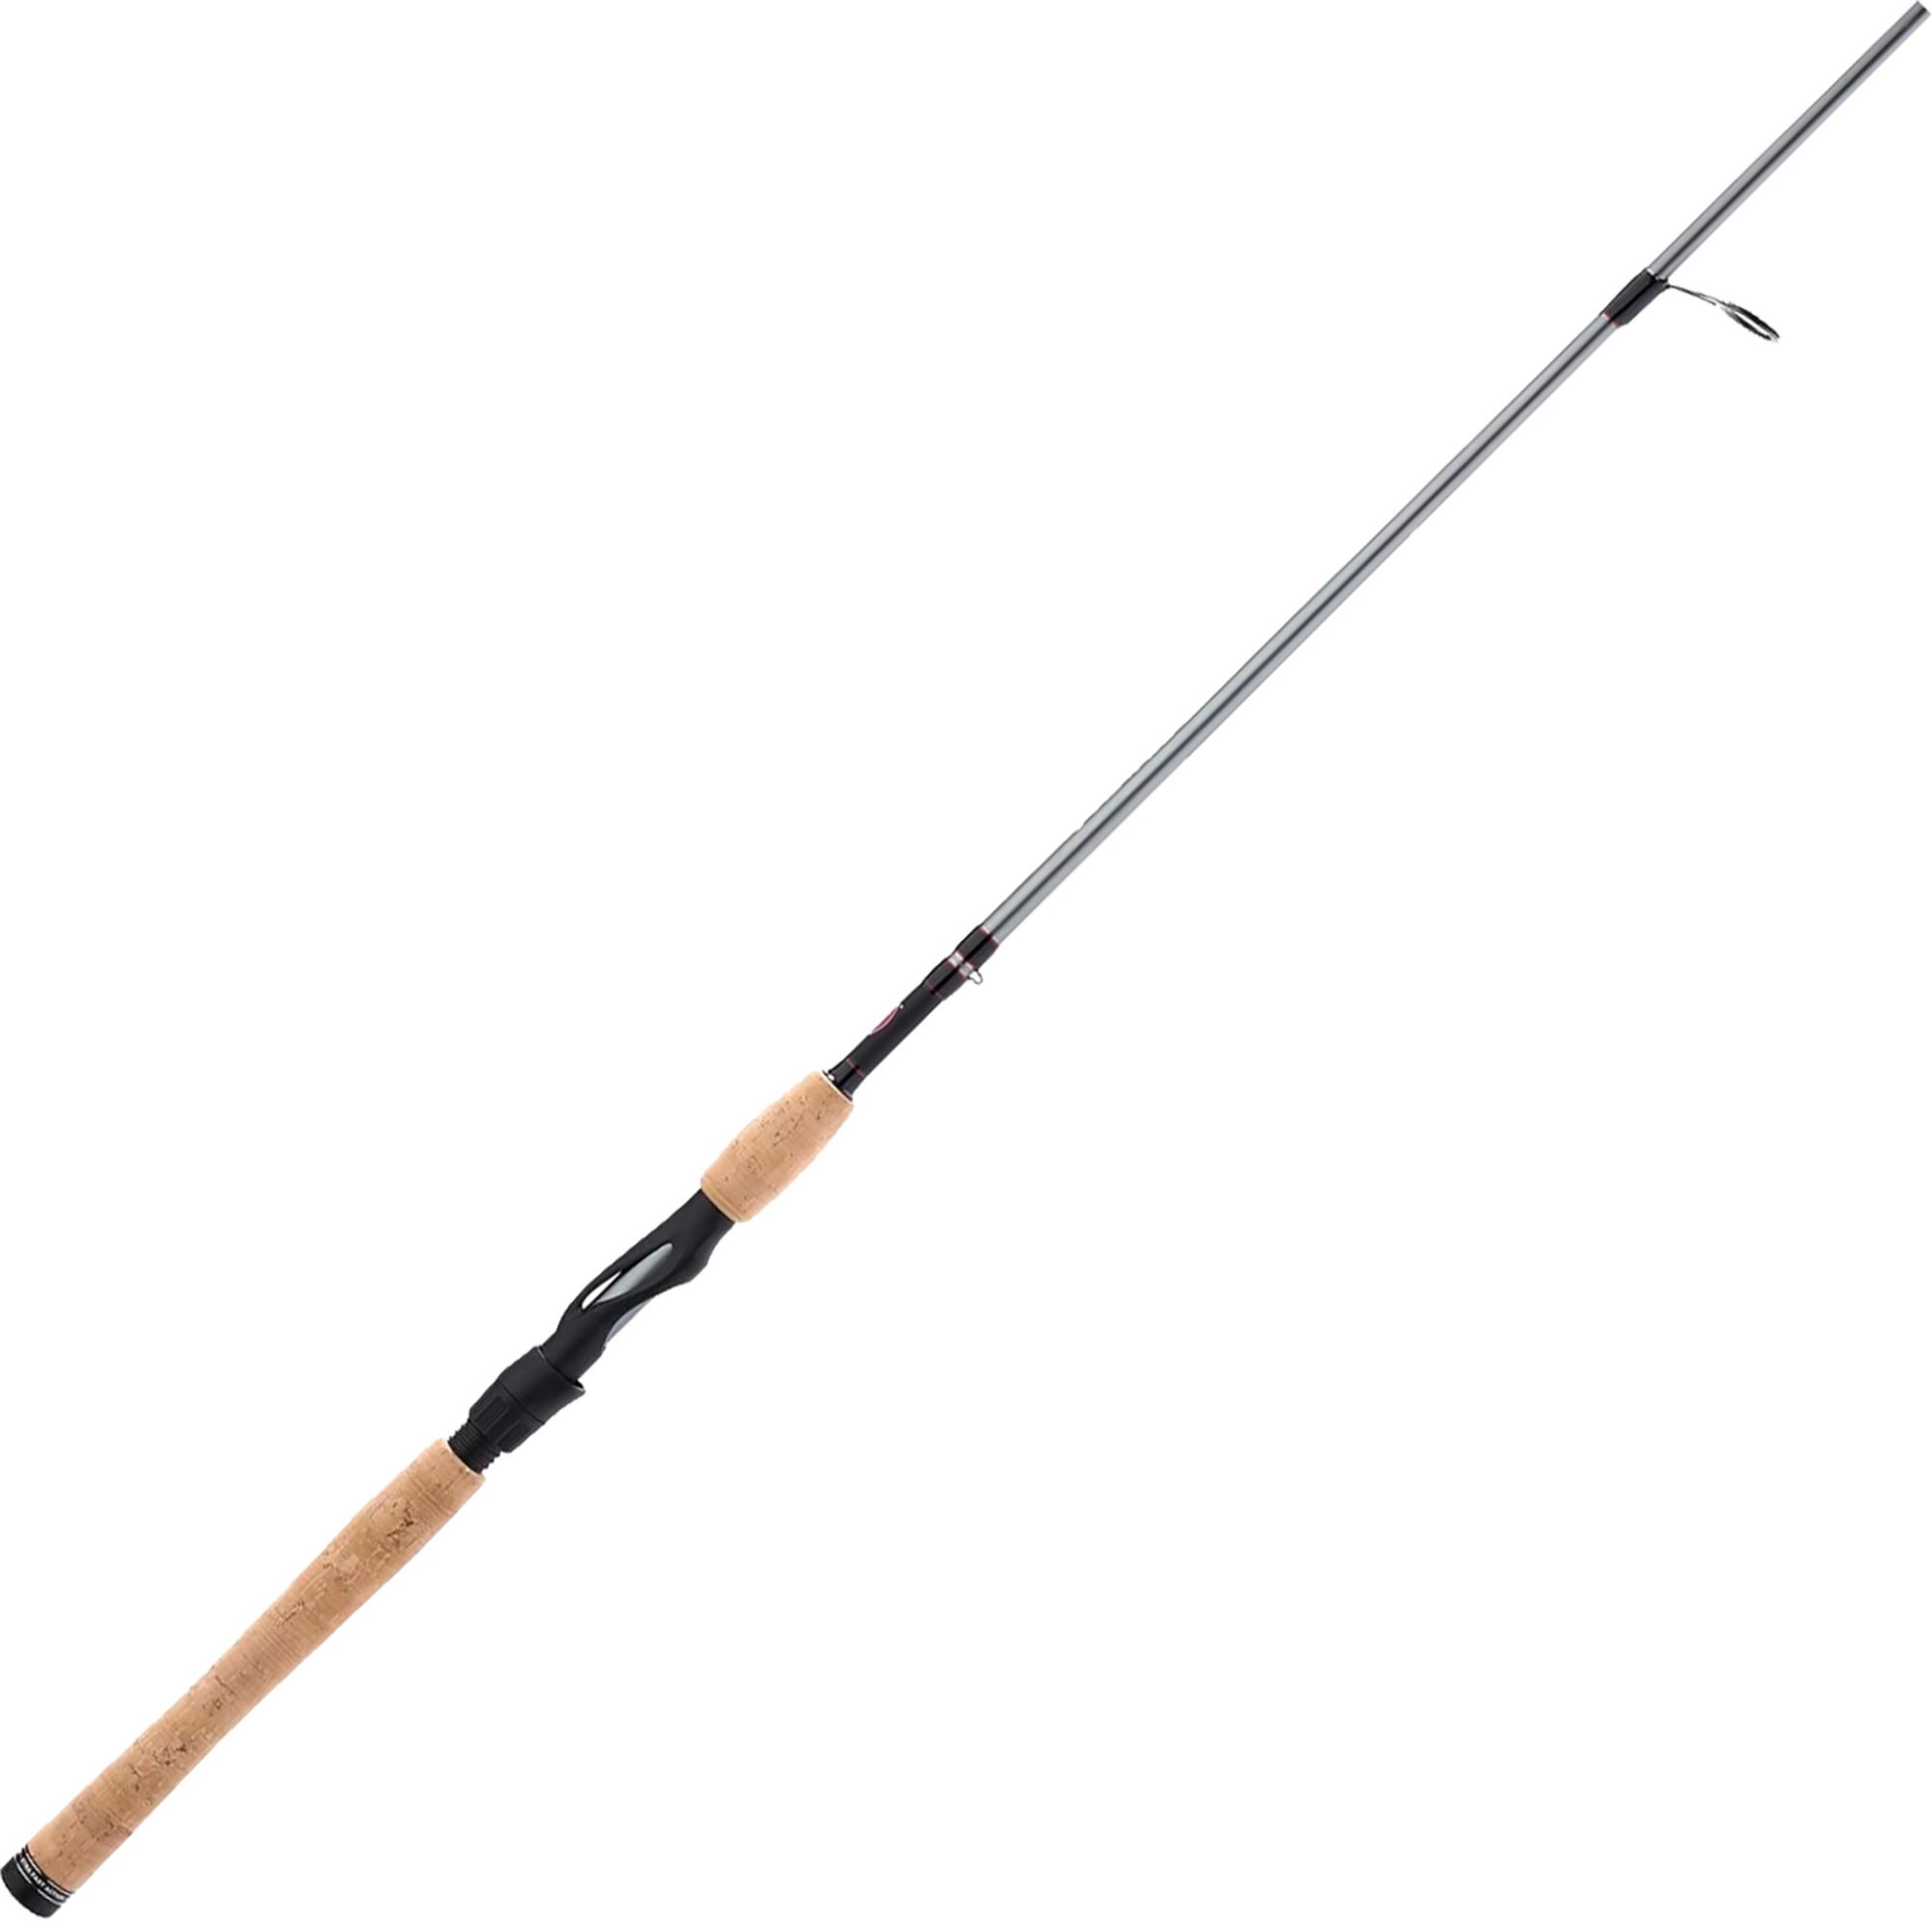 Photos - Other for Fishing PENN Fishing Prevail III Surf Spinning Rod 23PNFUPNNPRVLSF12ROD